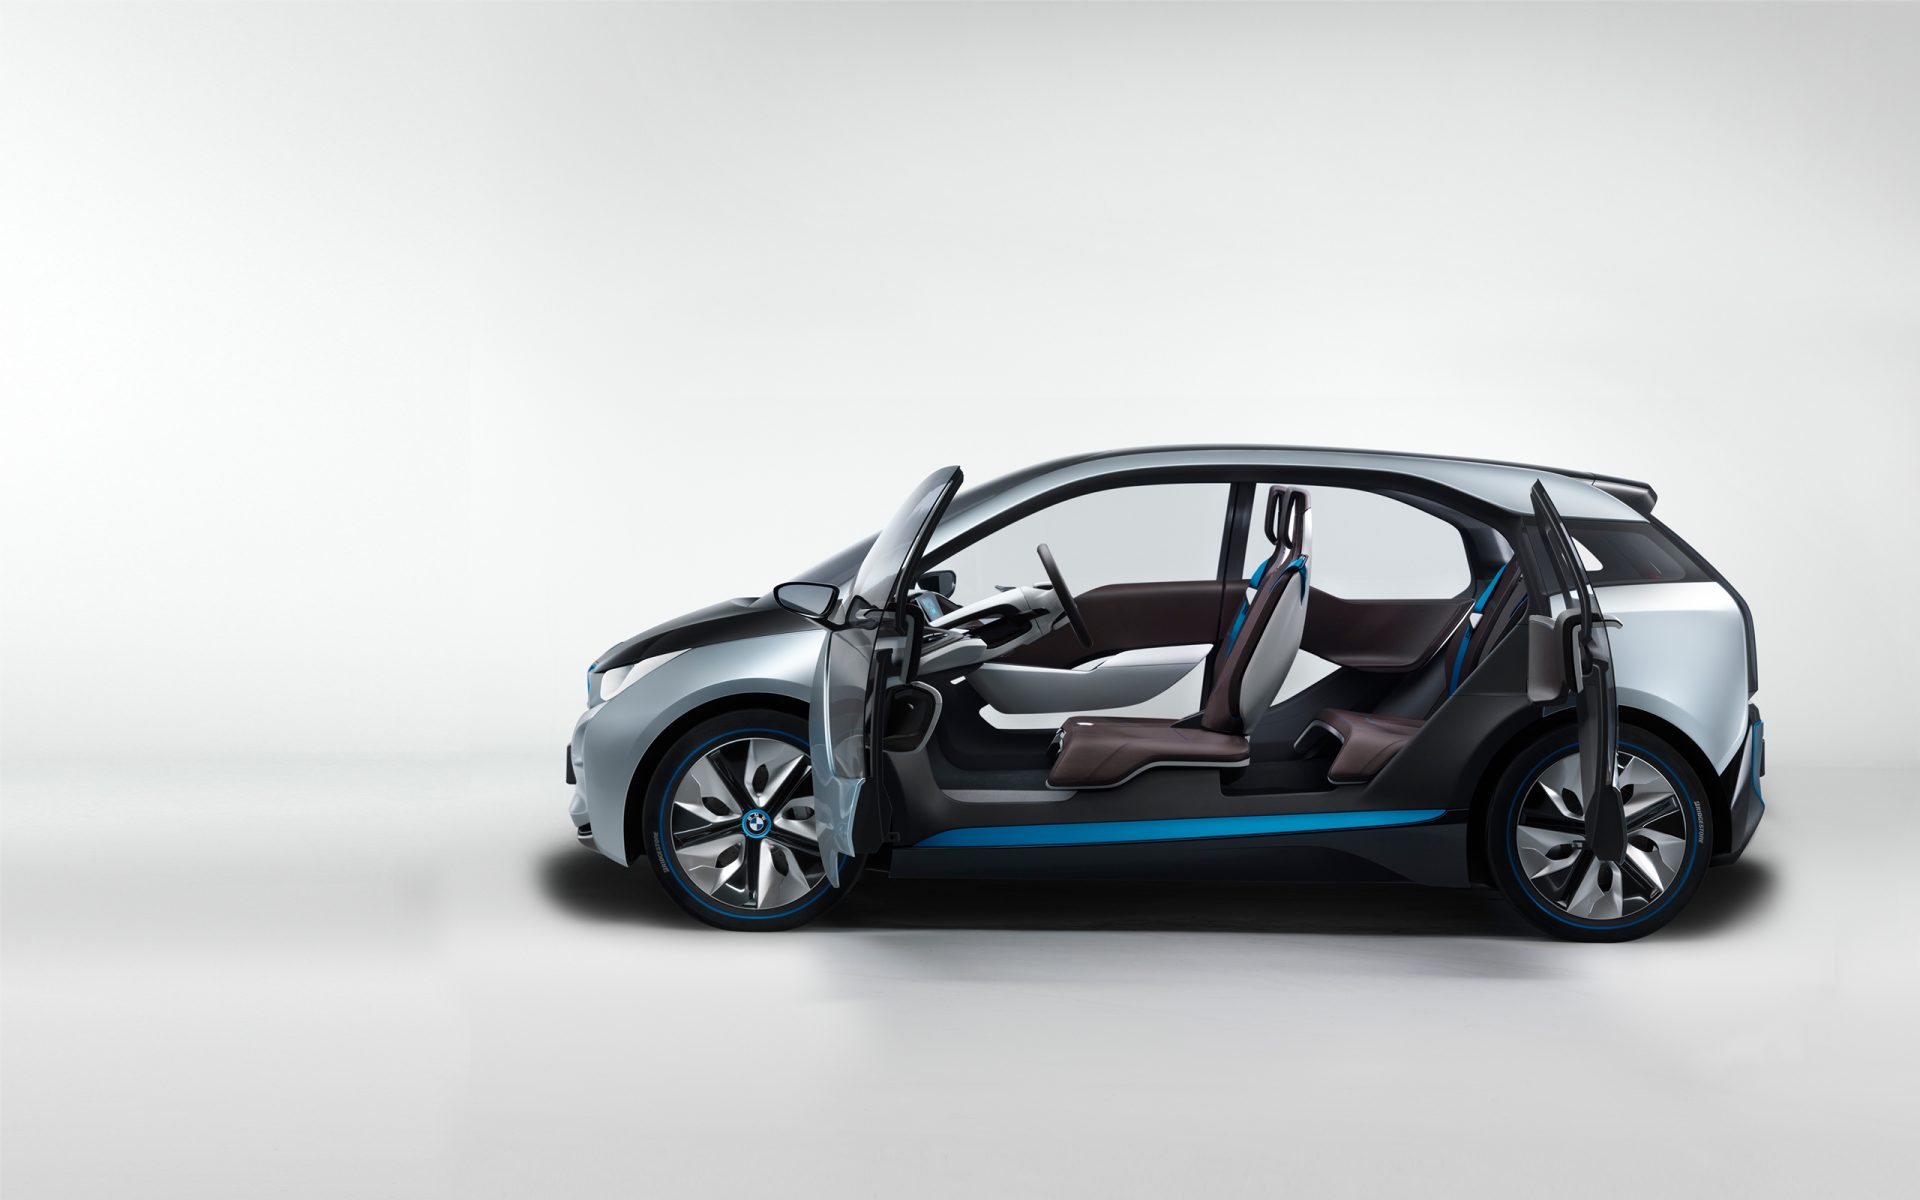 The BMW Group invests in electro-mobility and unveils the BMW i3.